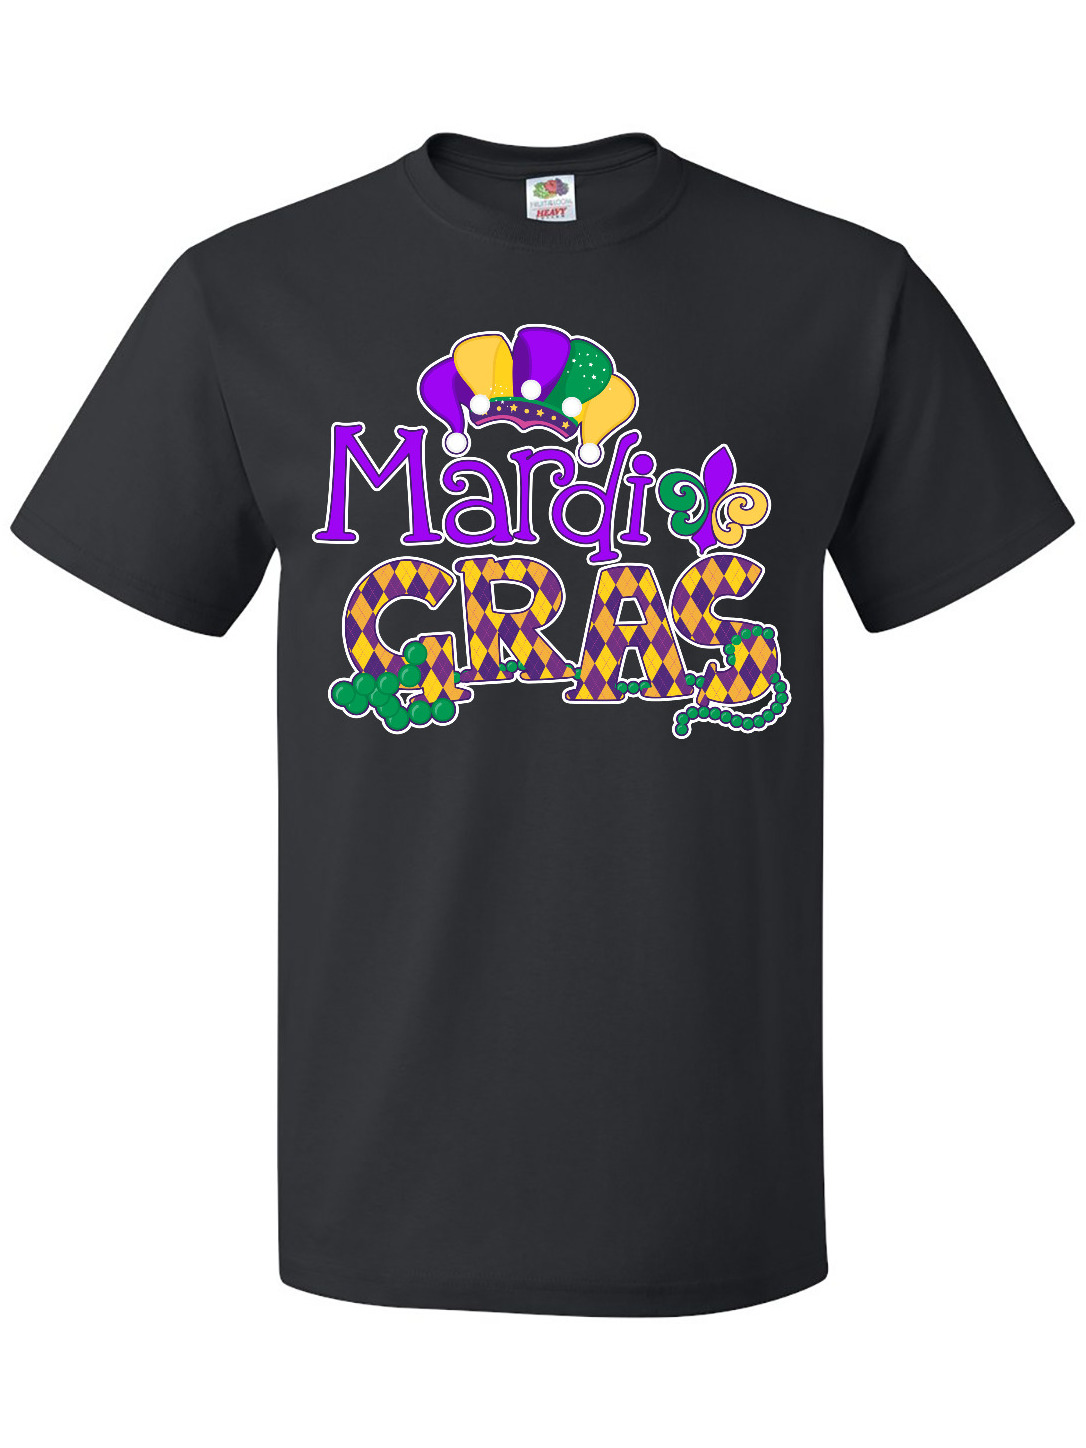 Inktastic Mardi Gras with Clown Hat and Beads T-Shirt - image 1 of 4